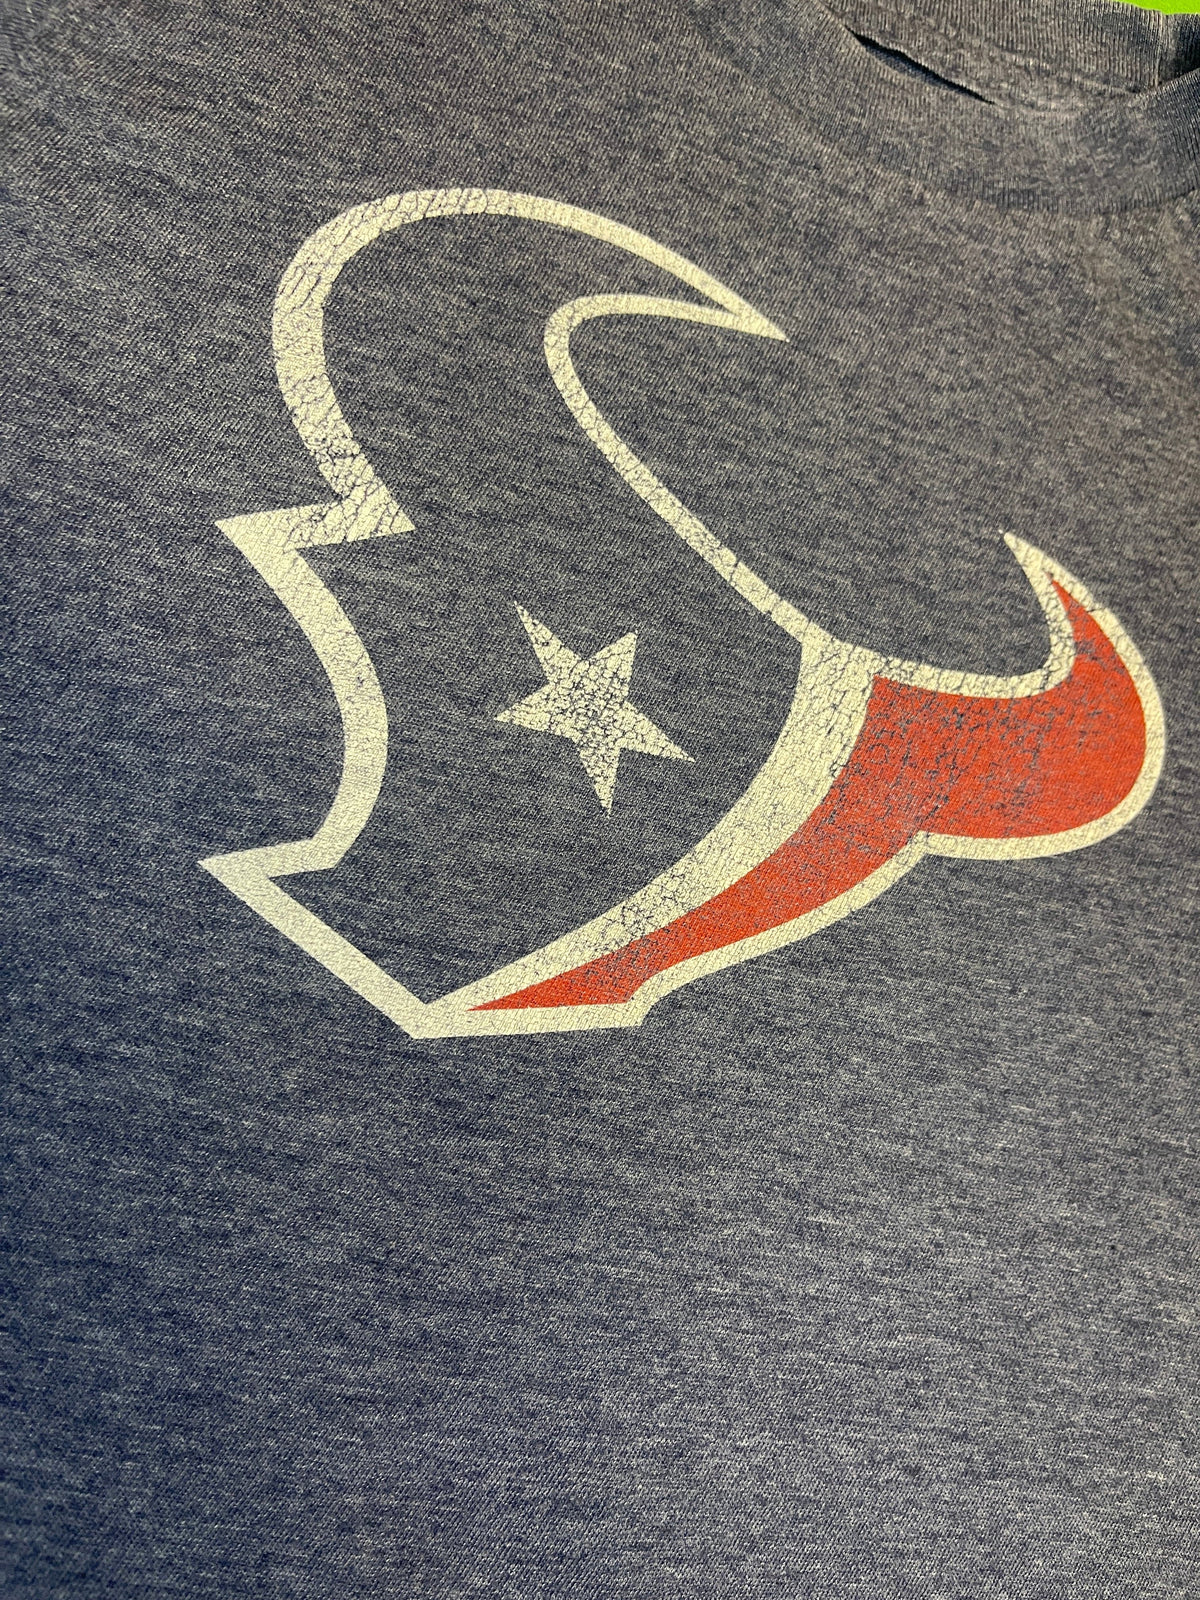 NFL Houston Texans Old Navy Heathered Blue T-Shirt Youth X-Small 5